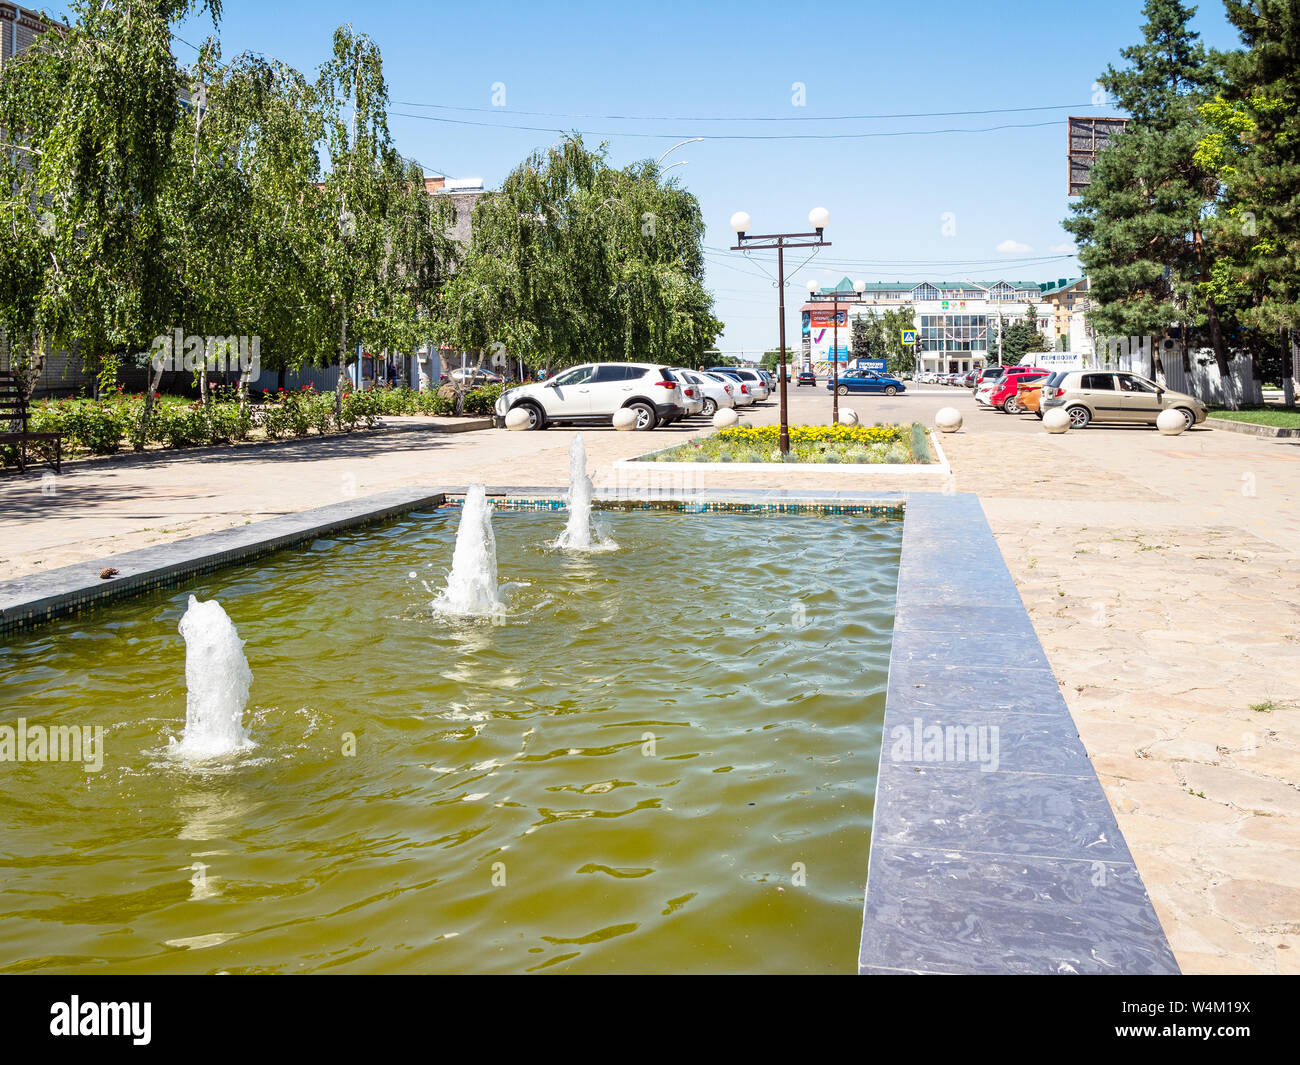 ABINSK, RUSSIA - JULY 2, 2019: water fountain and car parking on Komsomolskaya street in Abinsk city in summer. Abinsk is town and administrative cent Stock Photo